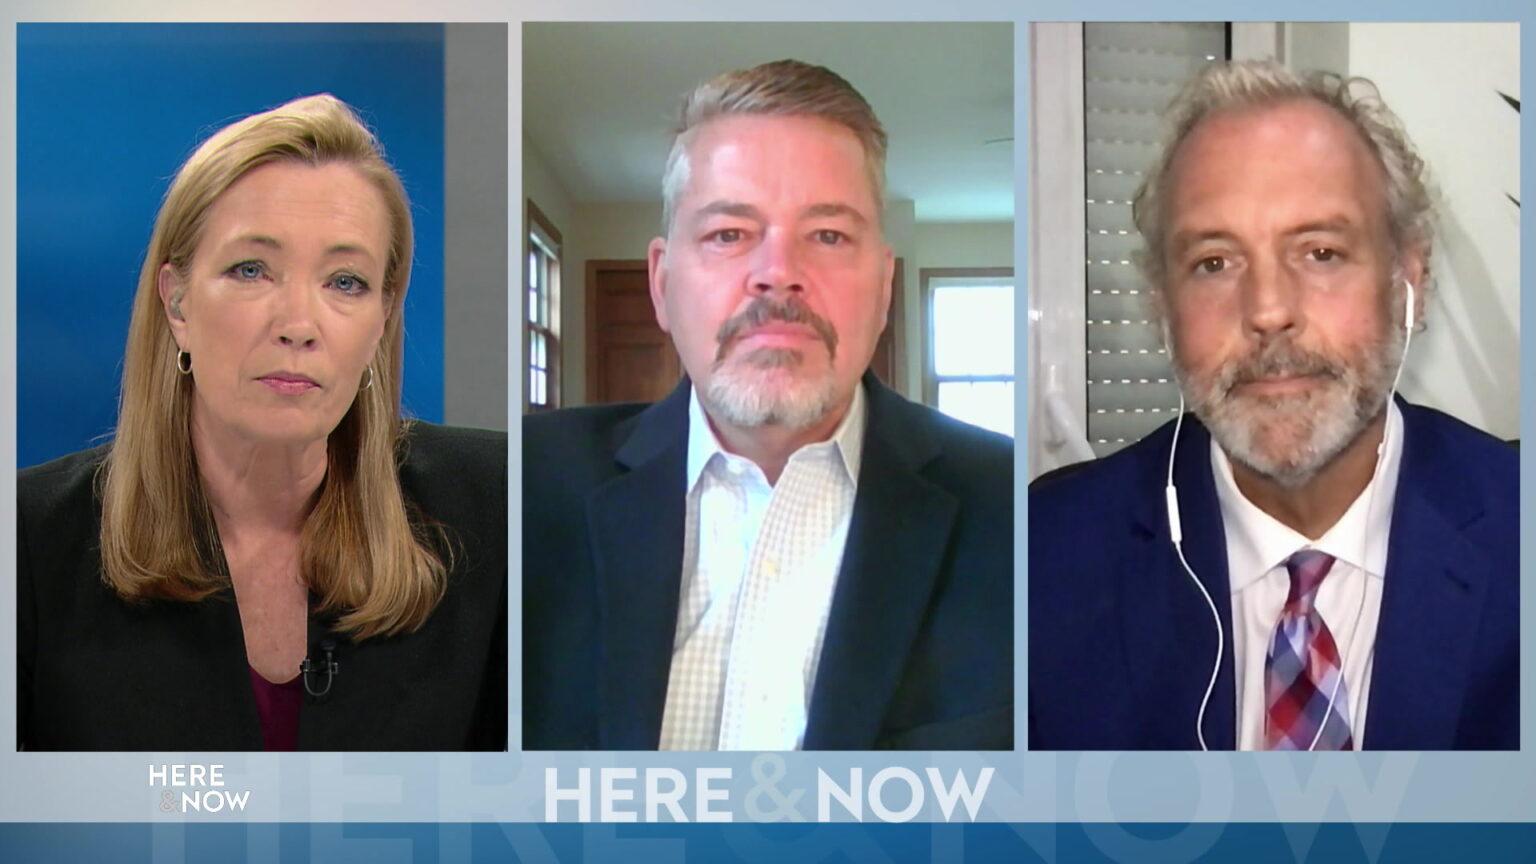 From left to right, a split screen with Frederica Freyberg, Bill McCoshen and Scot Ross seated in different locations